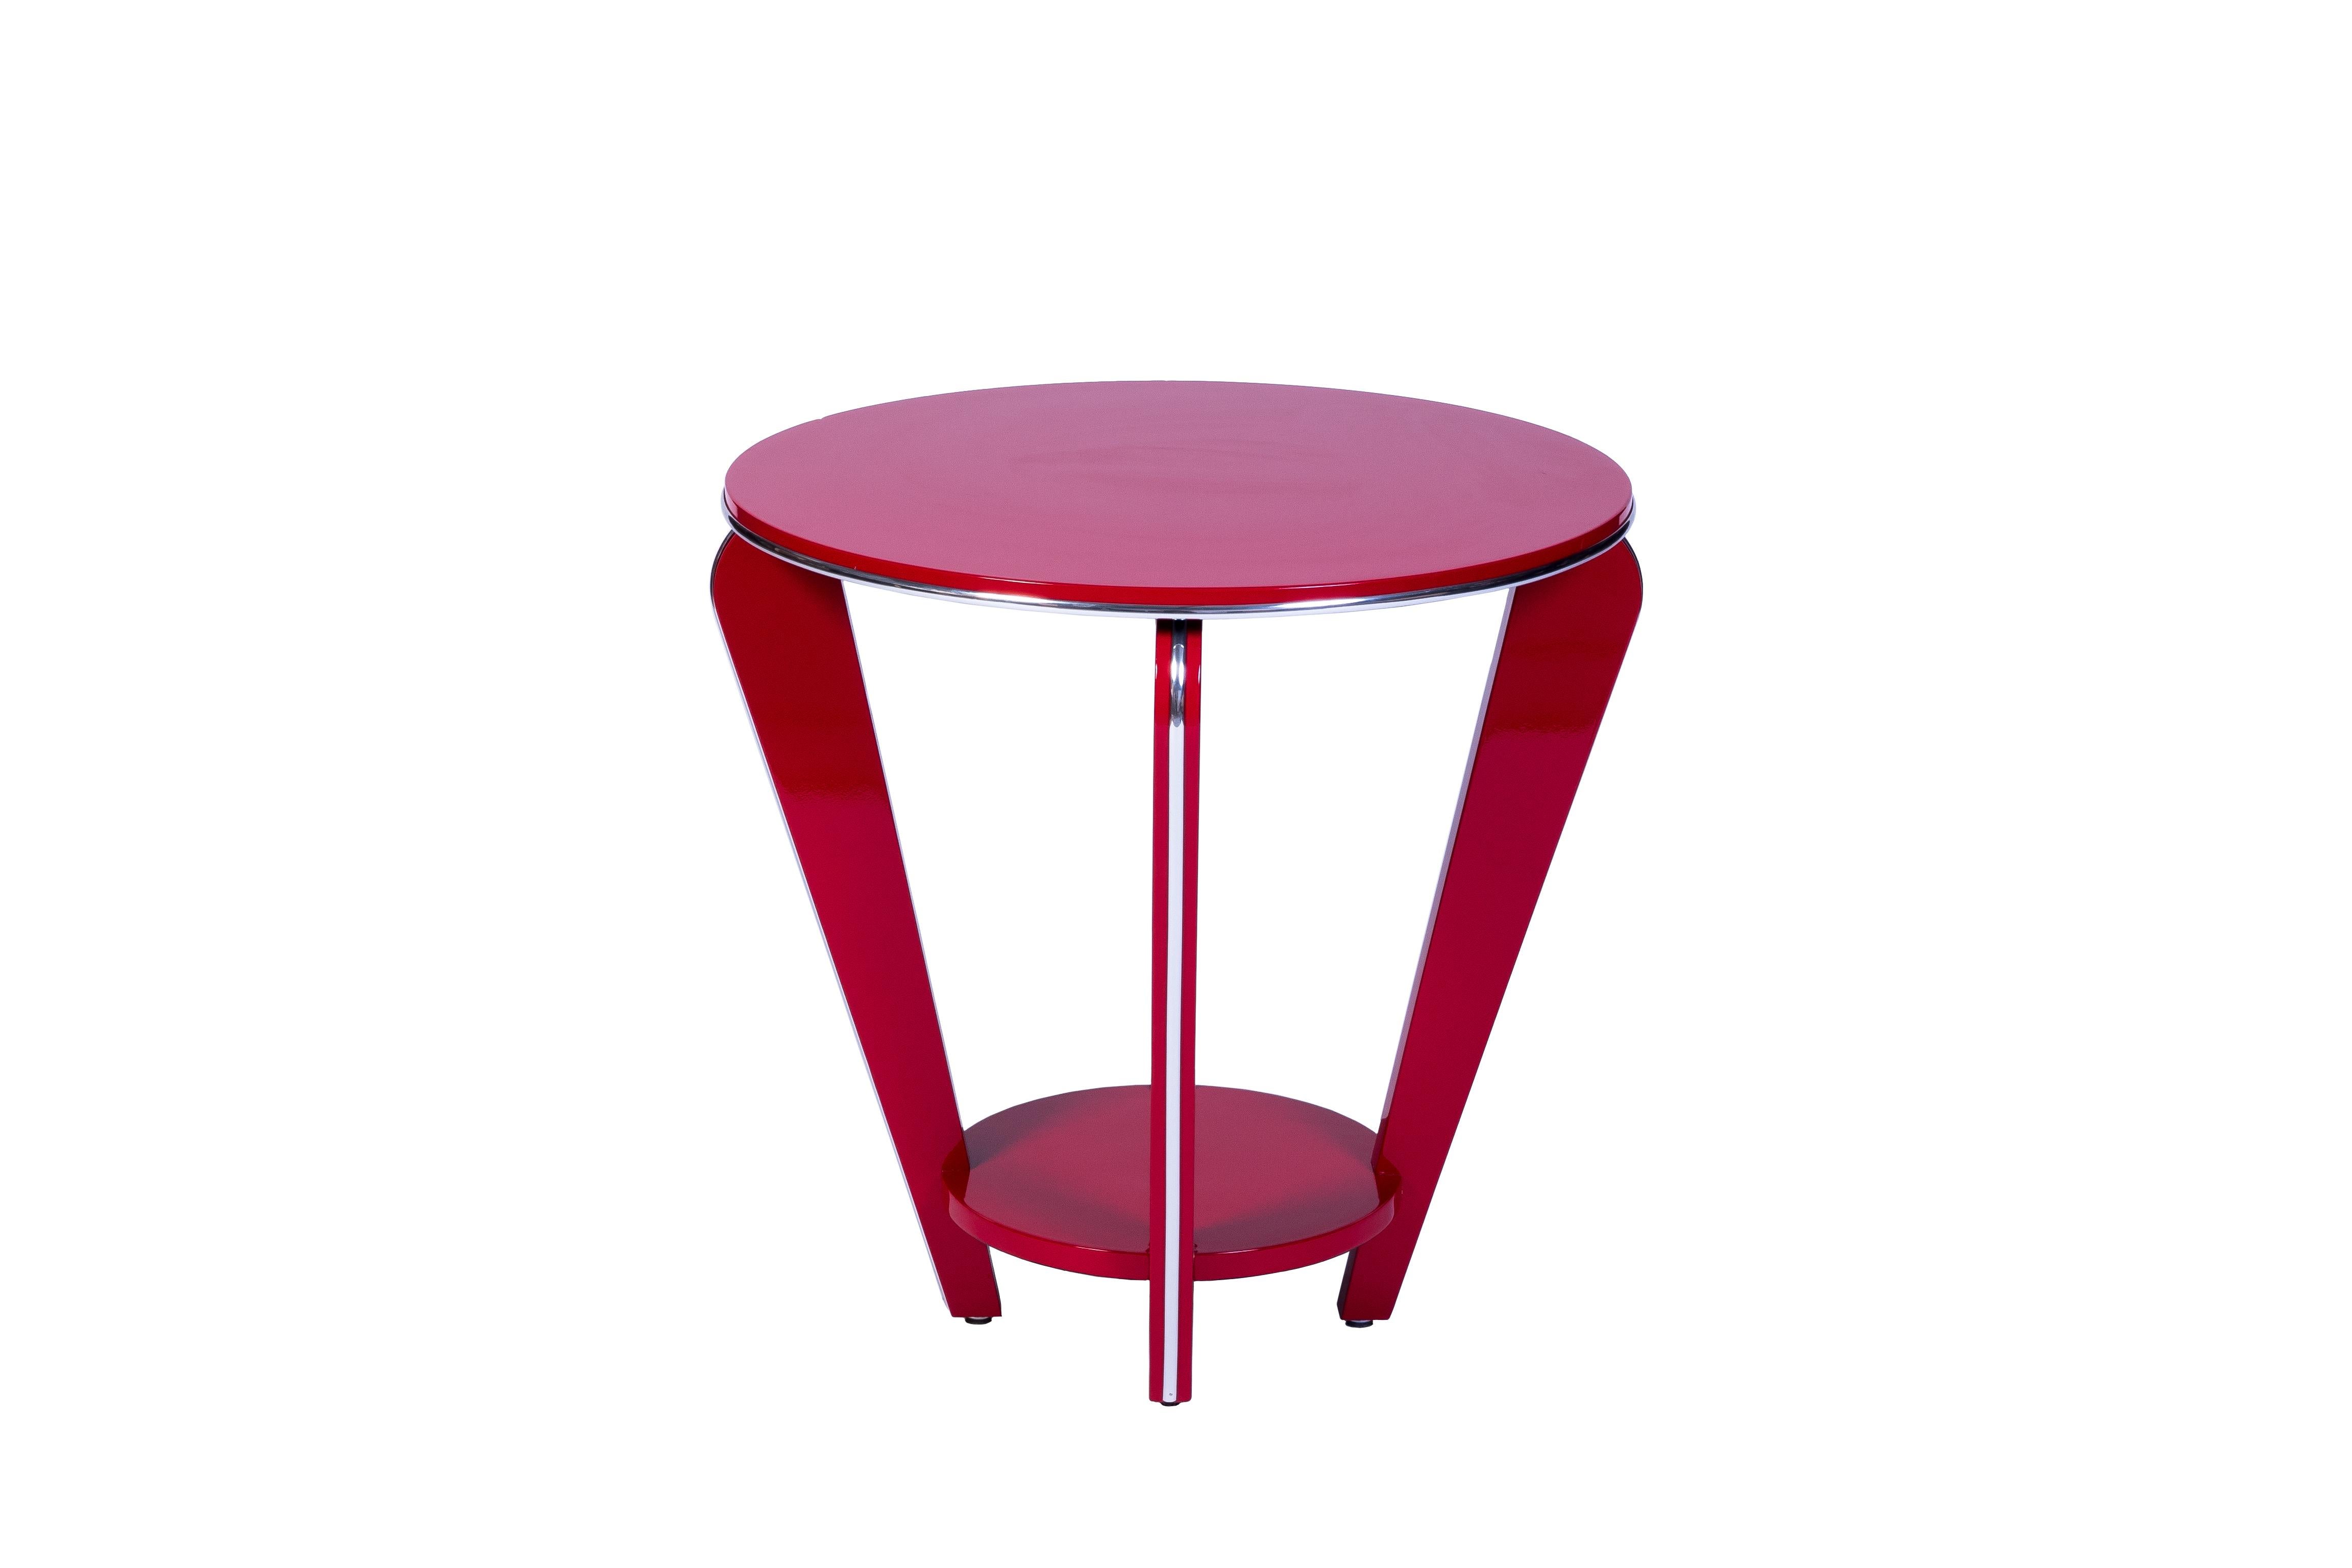 German Art Deco Style Side Table in Crimson Lacquer